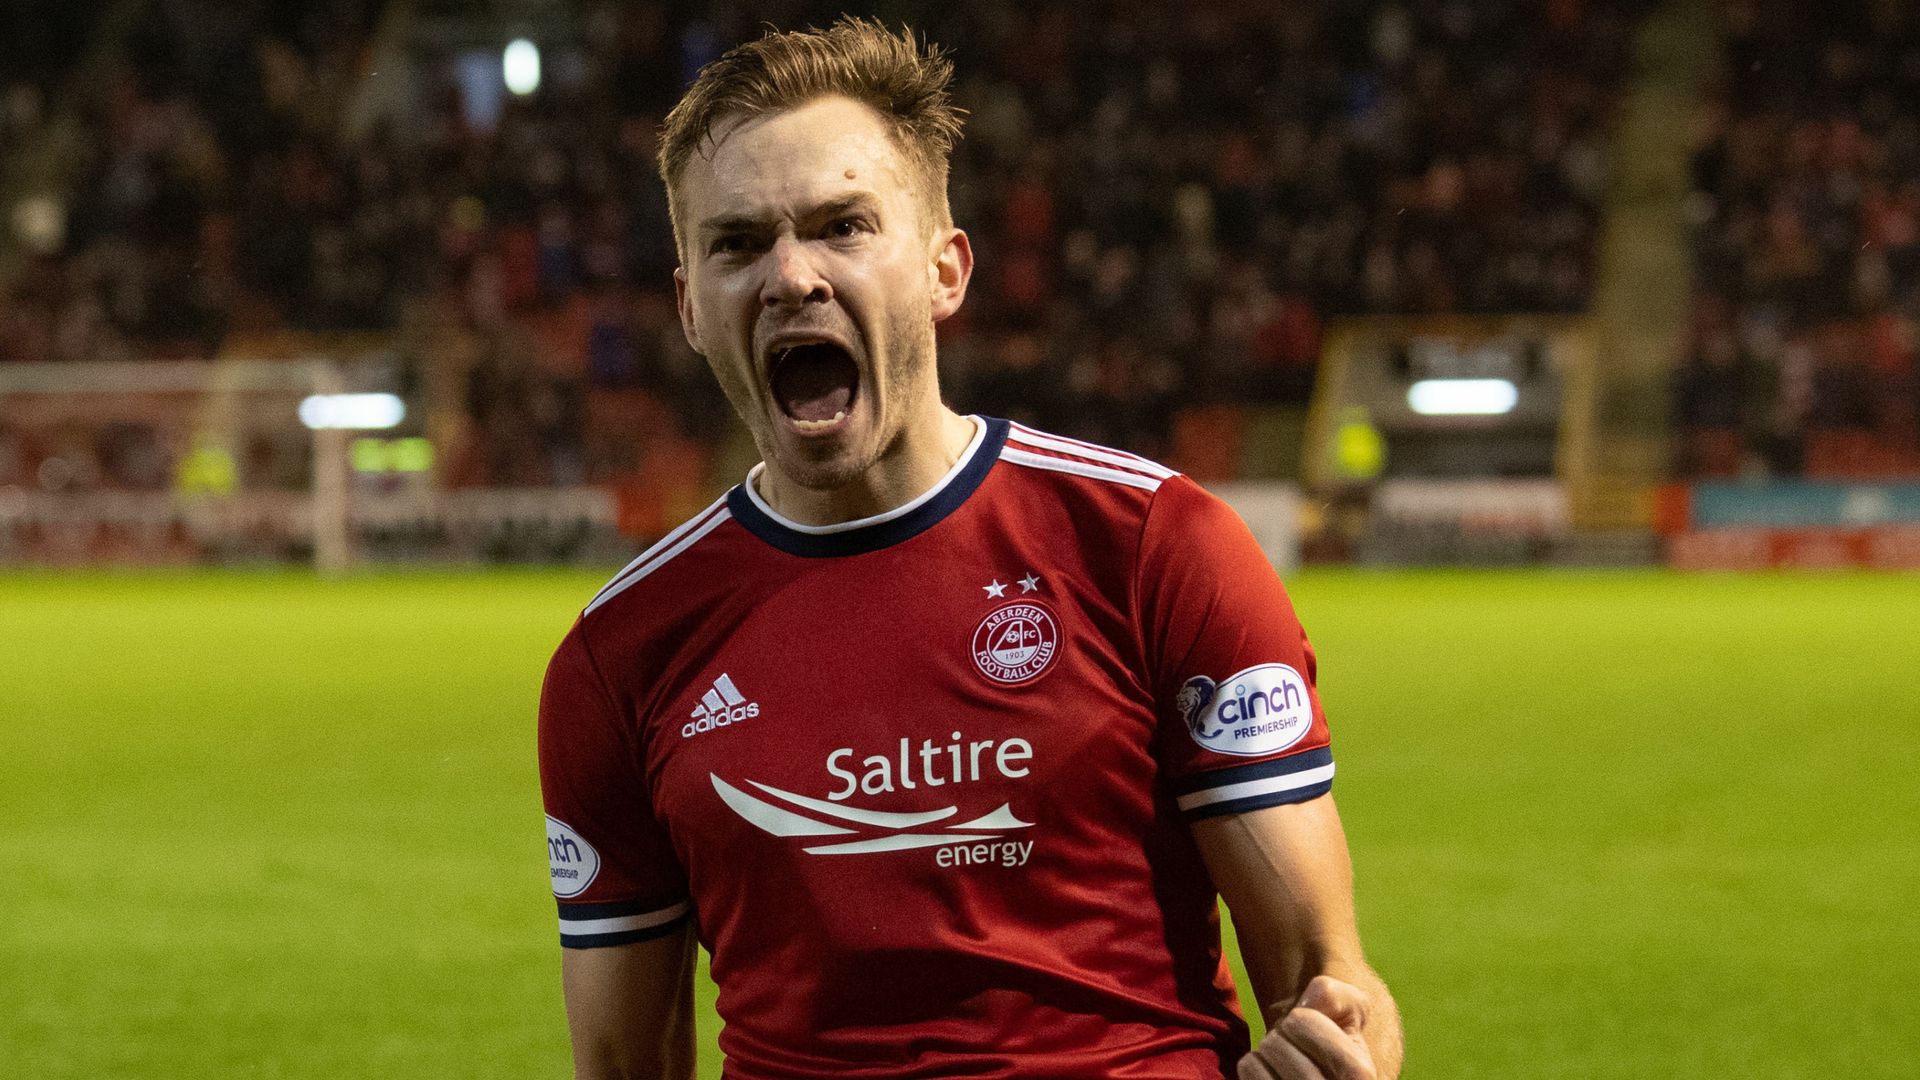 Hedges, Bates on target as Aberdeen see off Livingston